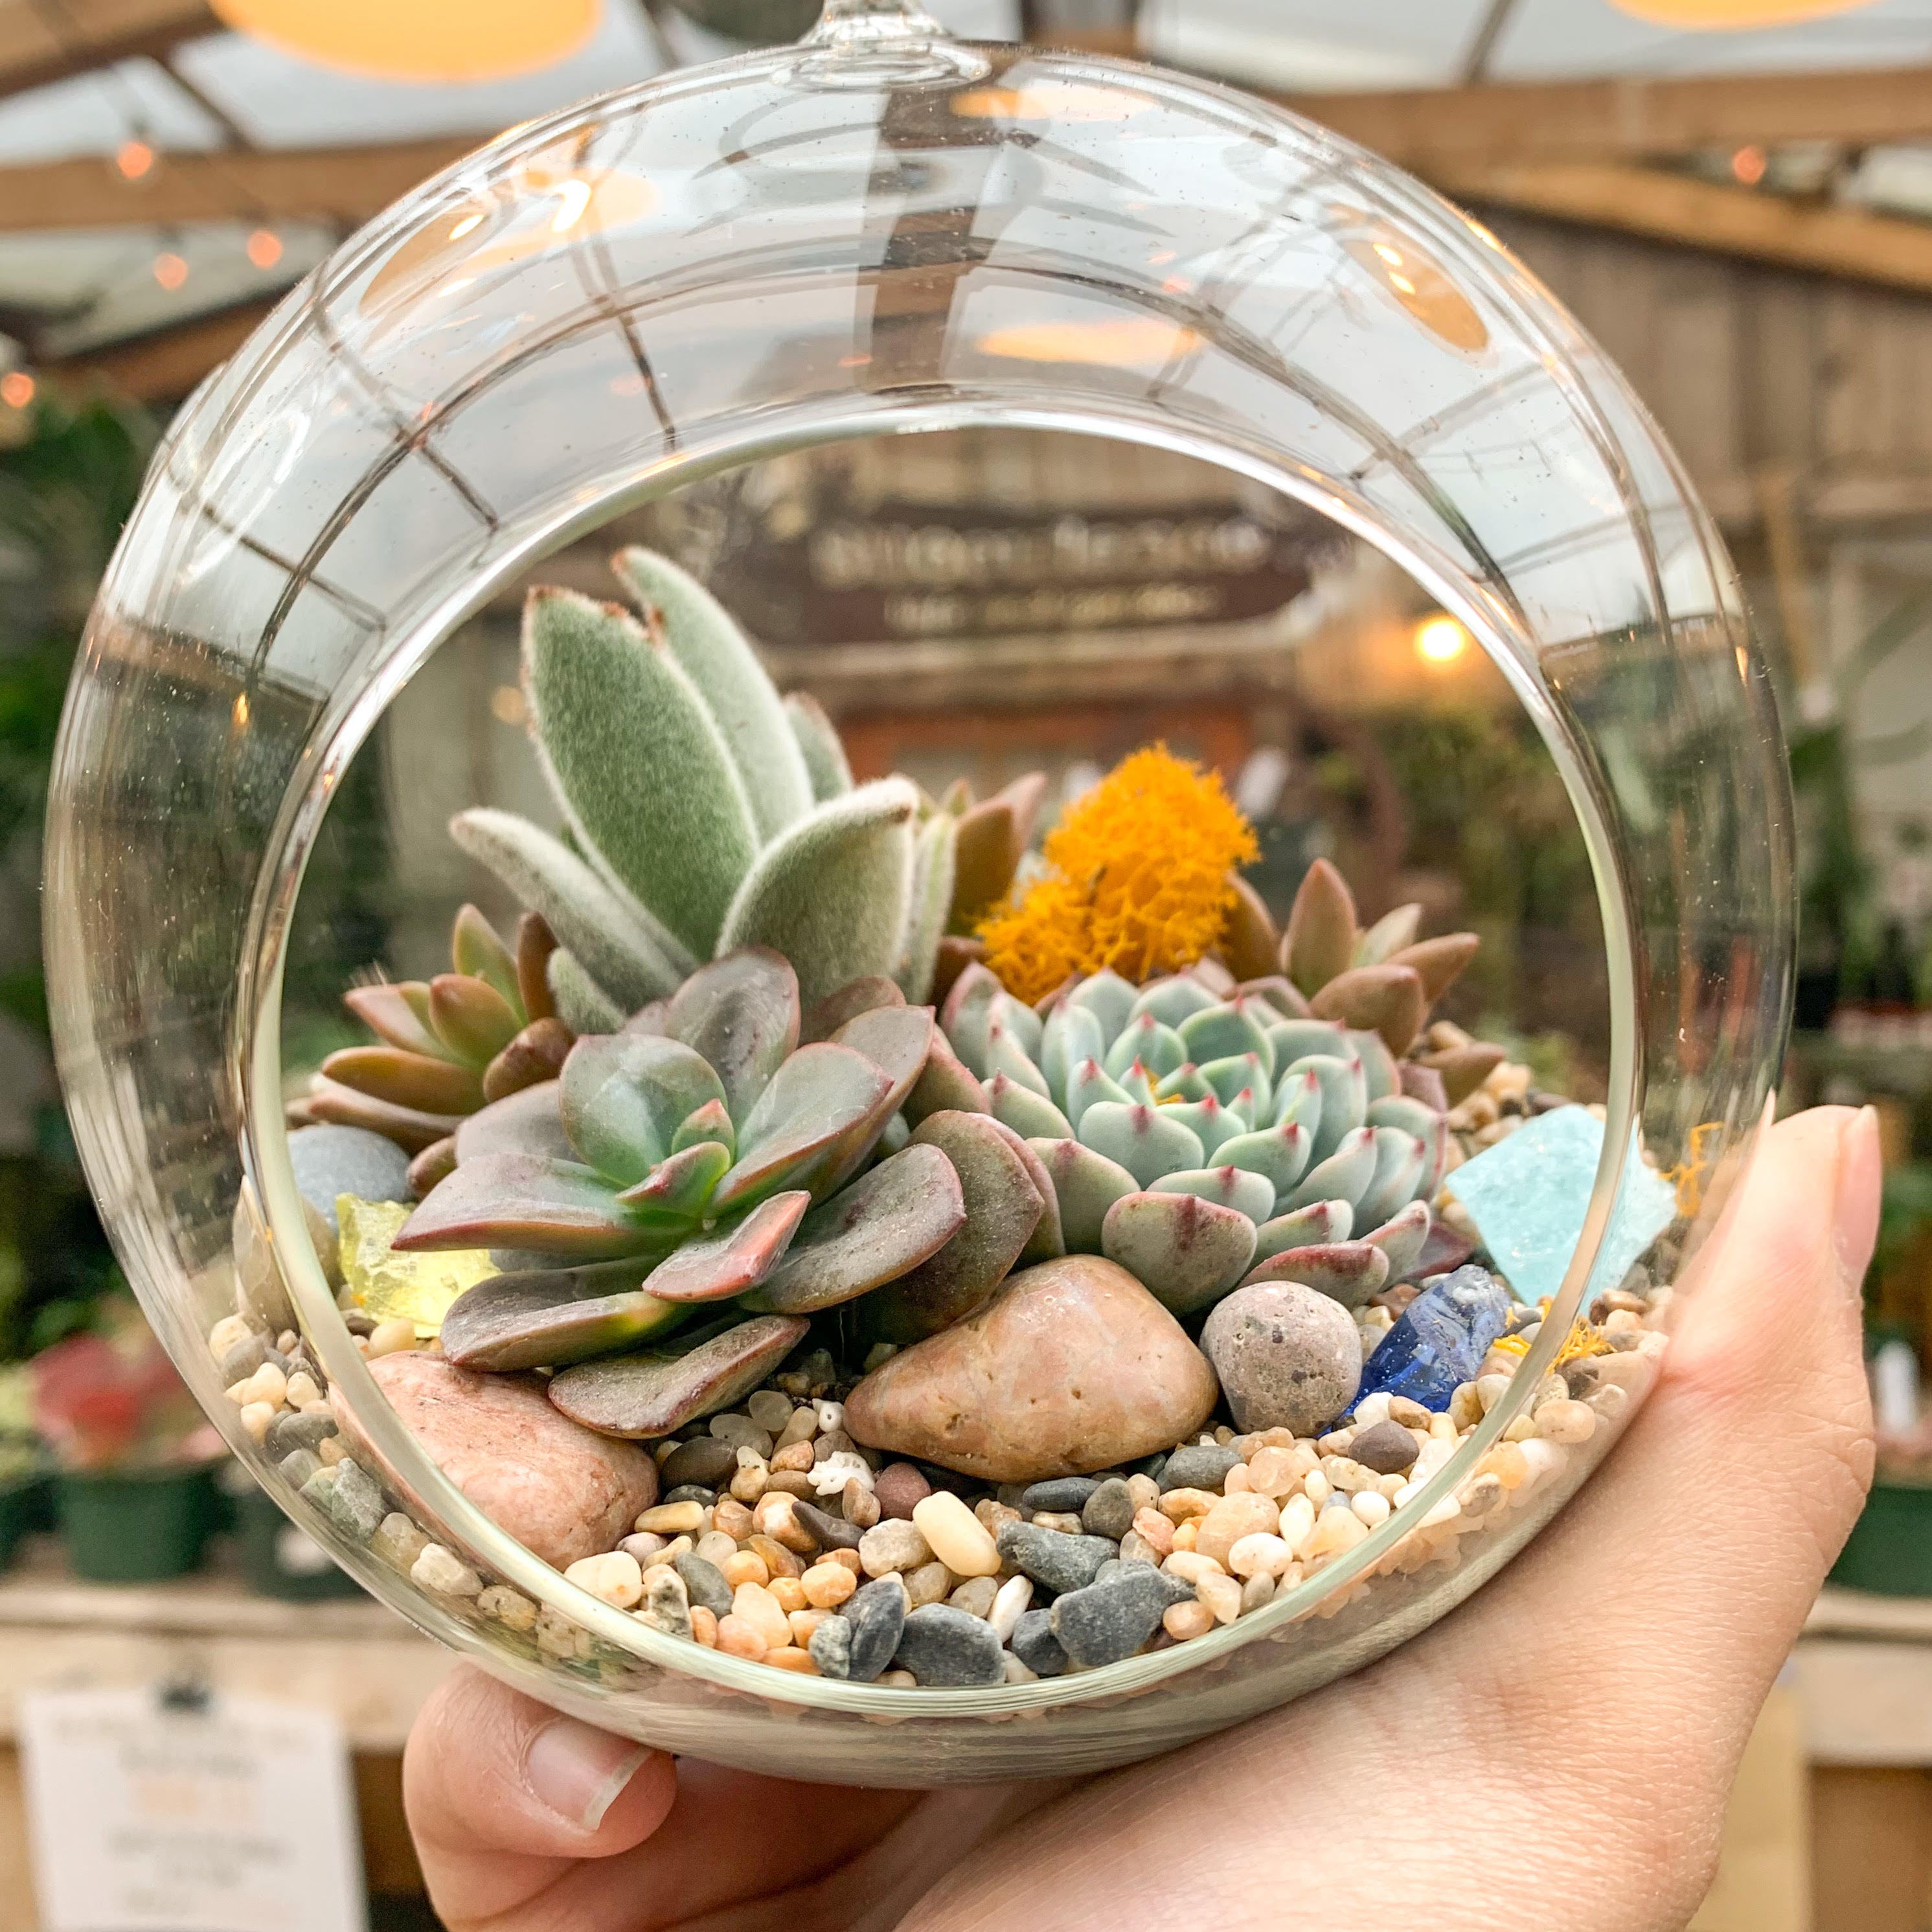 This build-your-own terrarium kit is now available for purchase in my , Terrarium